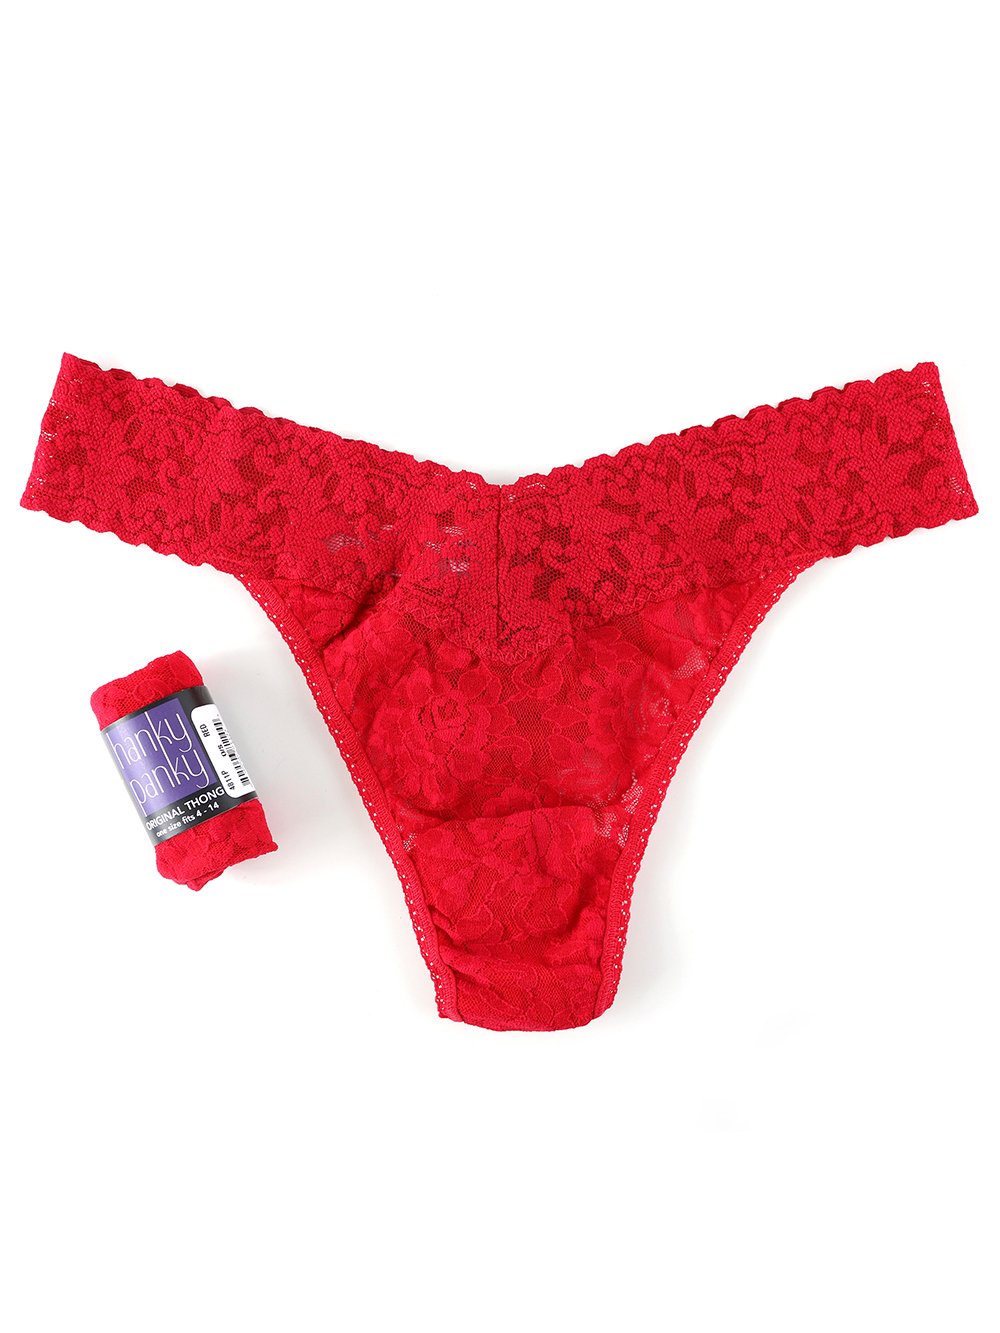 Hanky Panky Thong Red / One Size Rolled Signature Lace Original Rise Thong